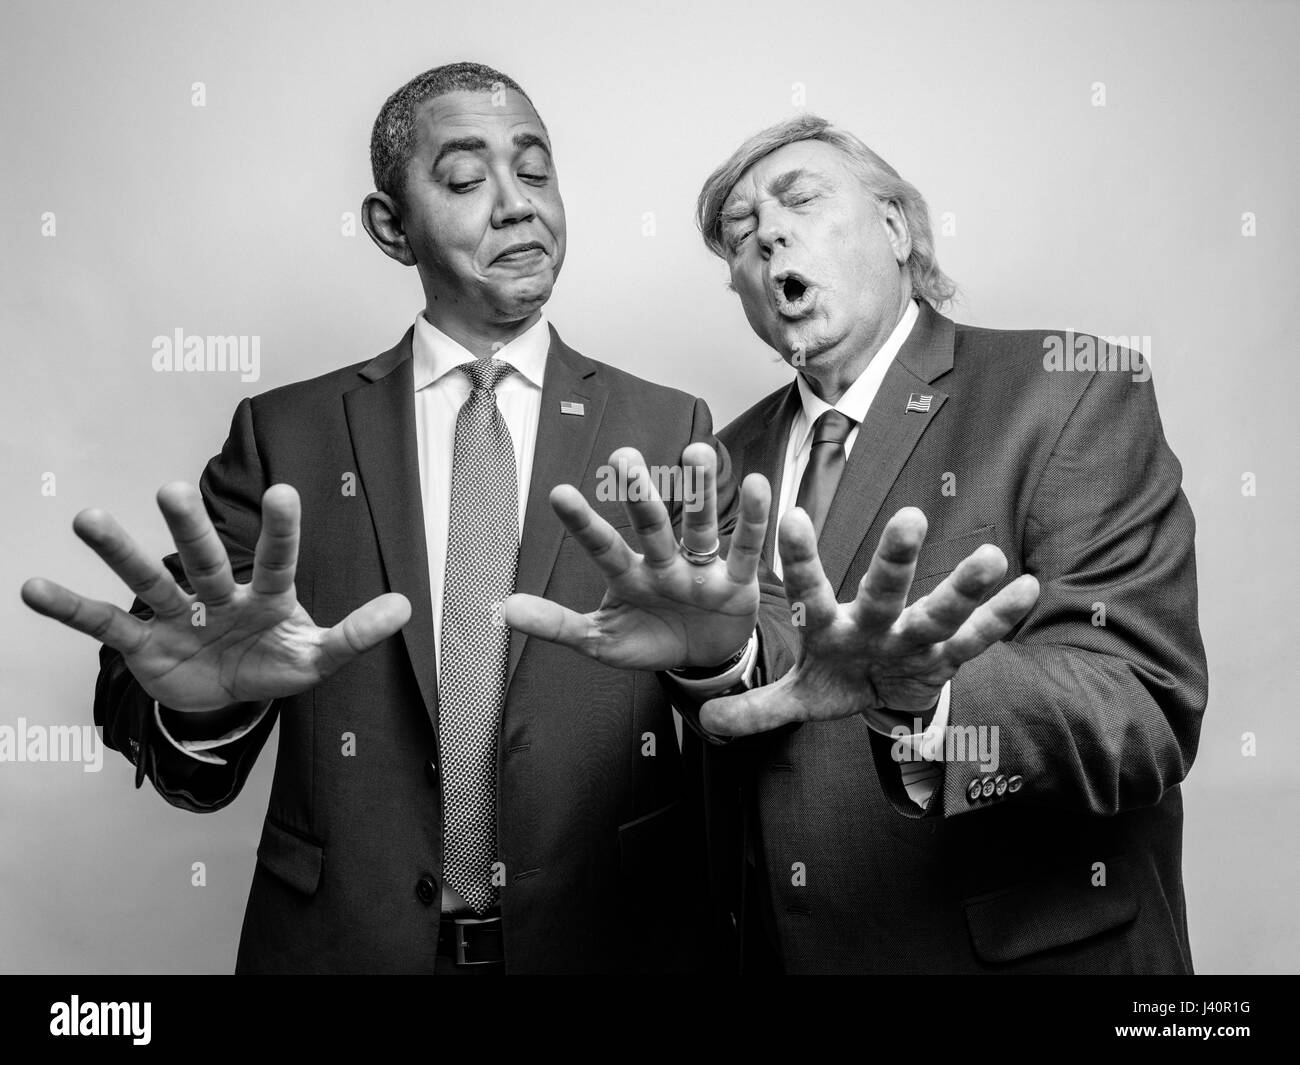 President Barack Obama and President Donald J Trump lookalikes compare hand sizes to see who has the biggest hands during a photoshoot in Hong Kong. Stock Photo